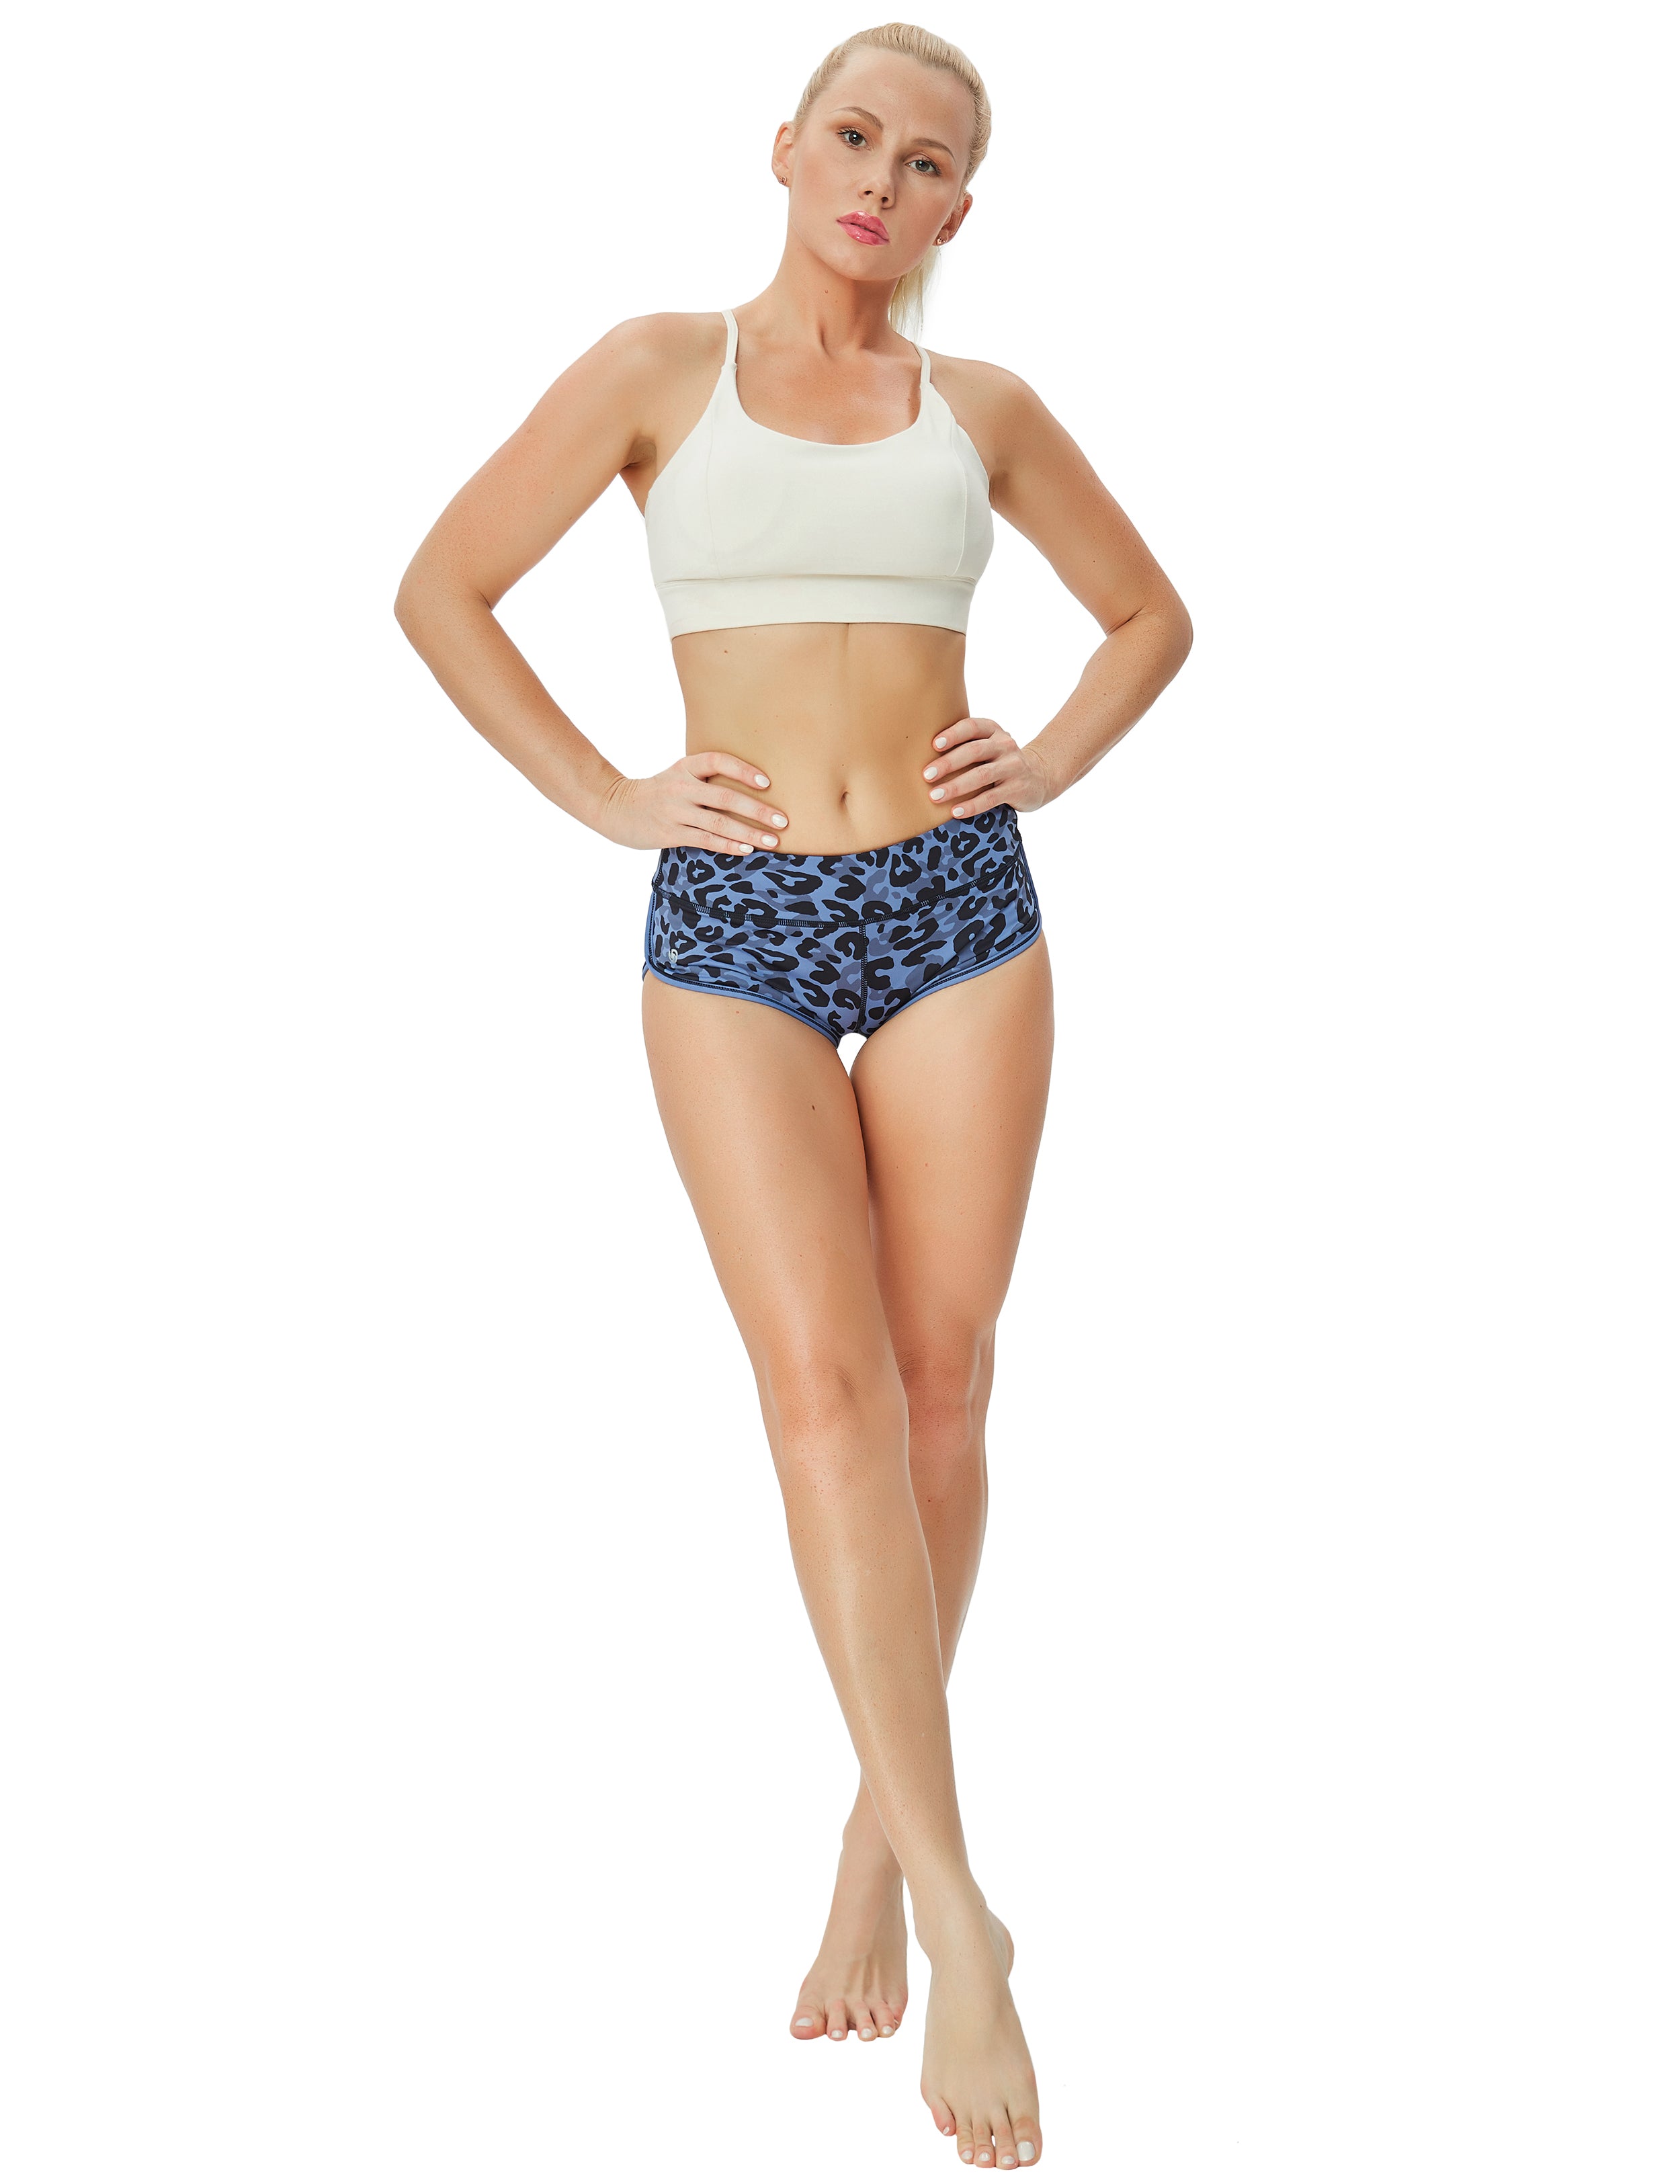 Printed Booty Yoga Shorts navy_leopard Sleek, soft, smooth and totally comfortable: our newest sexy style is here. Softest-ever fabric High elasticity High density 4-way stretch Fabric doesn't attract lint easily No see-through Moisture-wicking Machine wash 78% Polyester, 22% Spandex